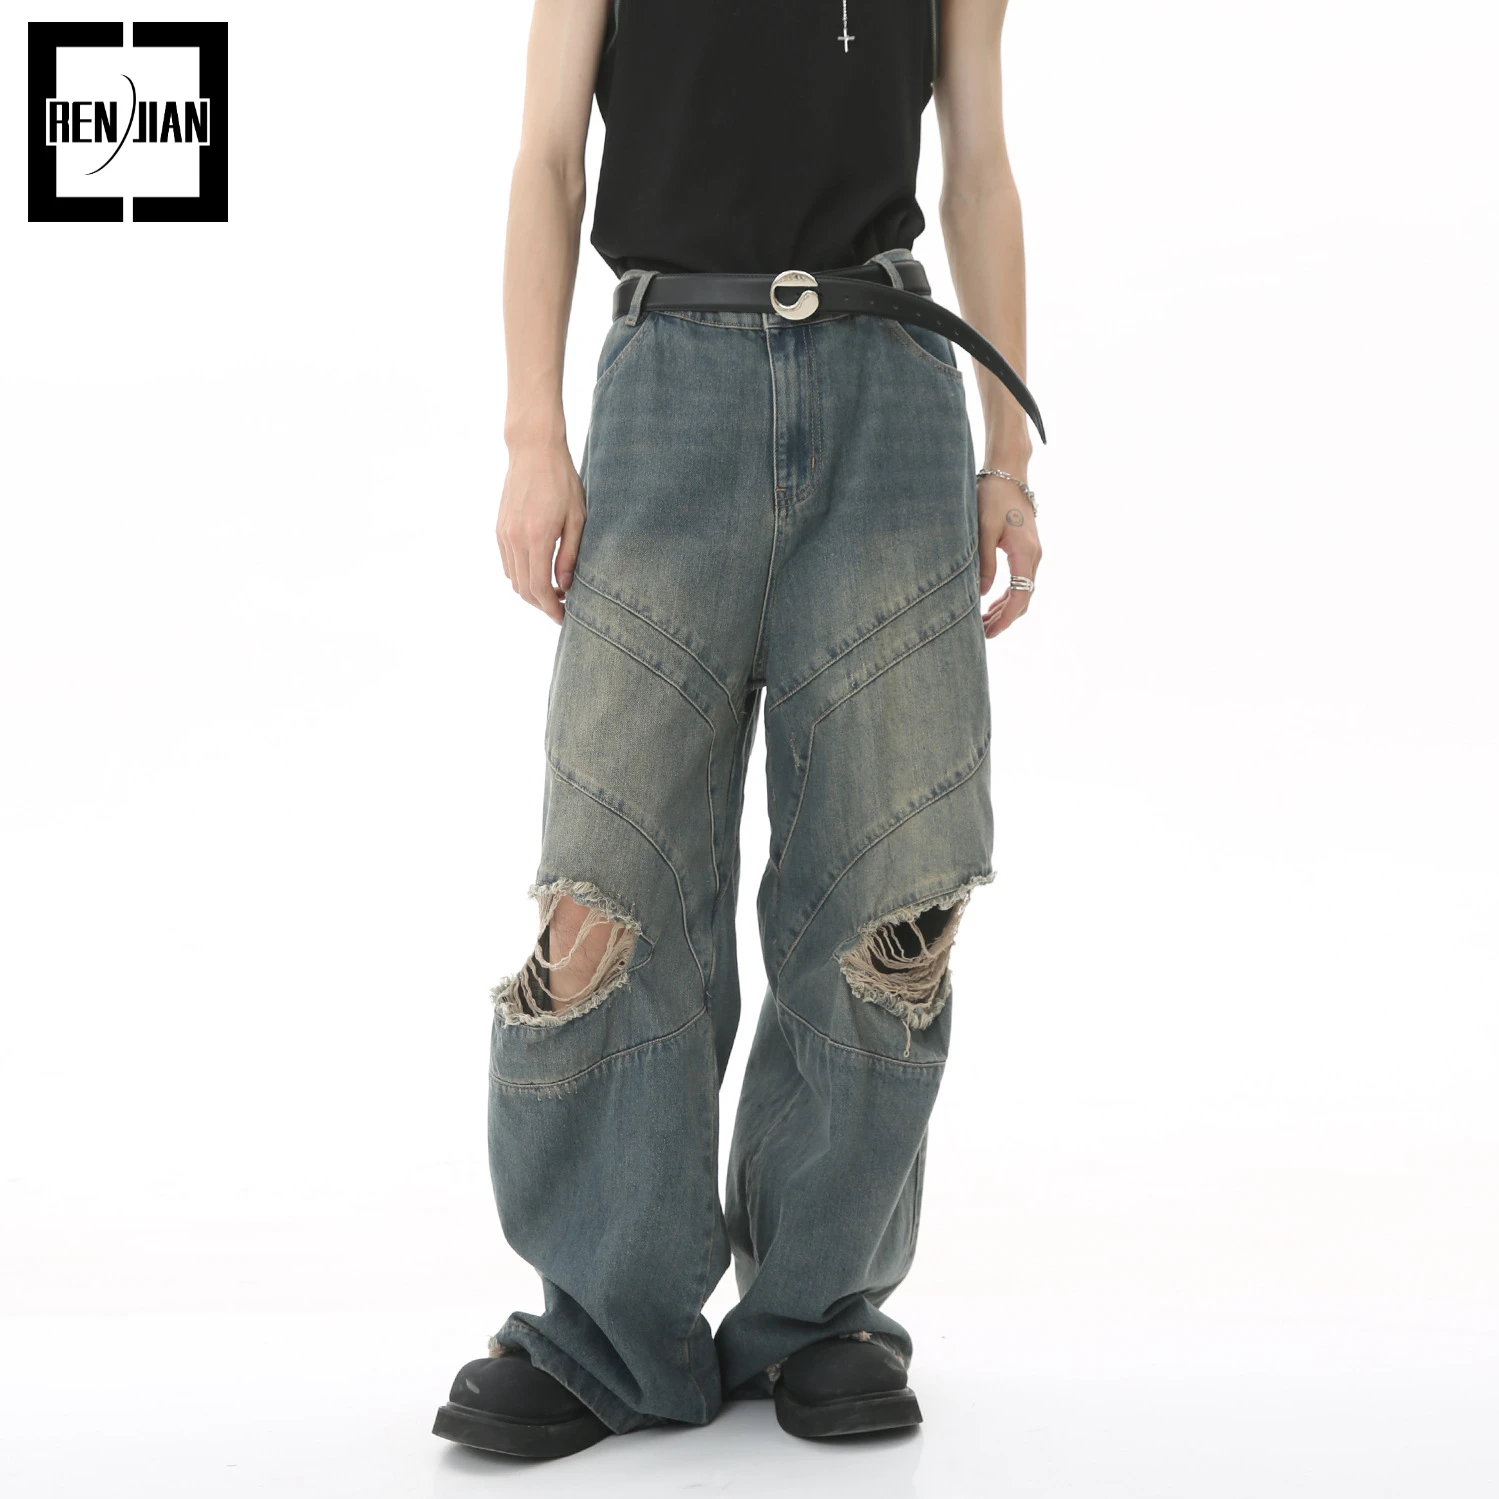 

High Street Ripped Oversize Hip Hop Jeans Pants Street Wear Destroyed Loose Fit Y2K Denim Trousers Distressed Vibe Style Bottoms